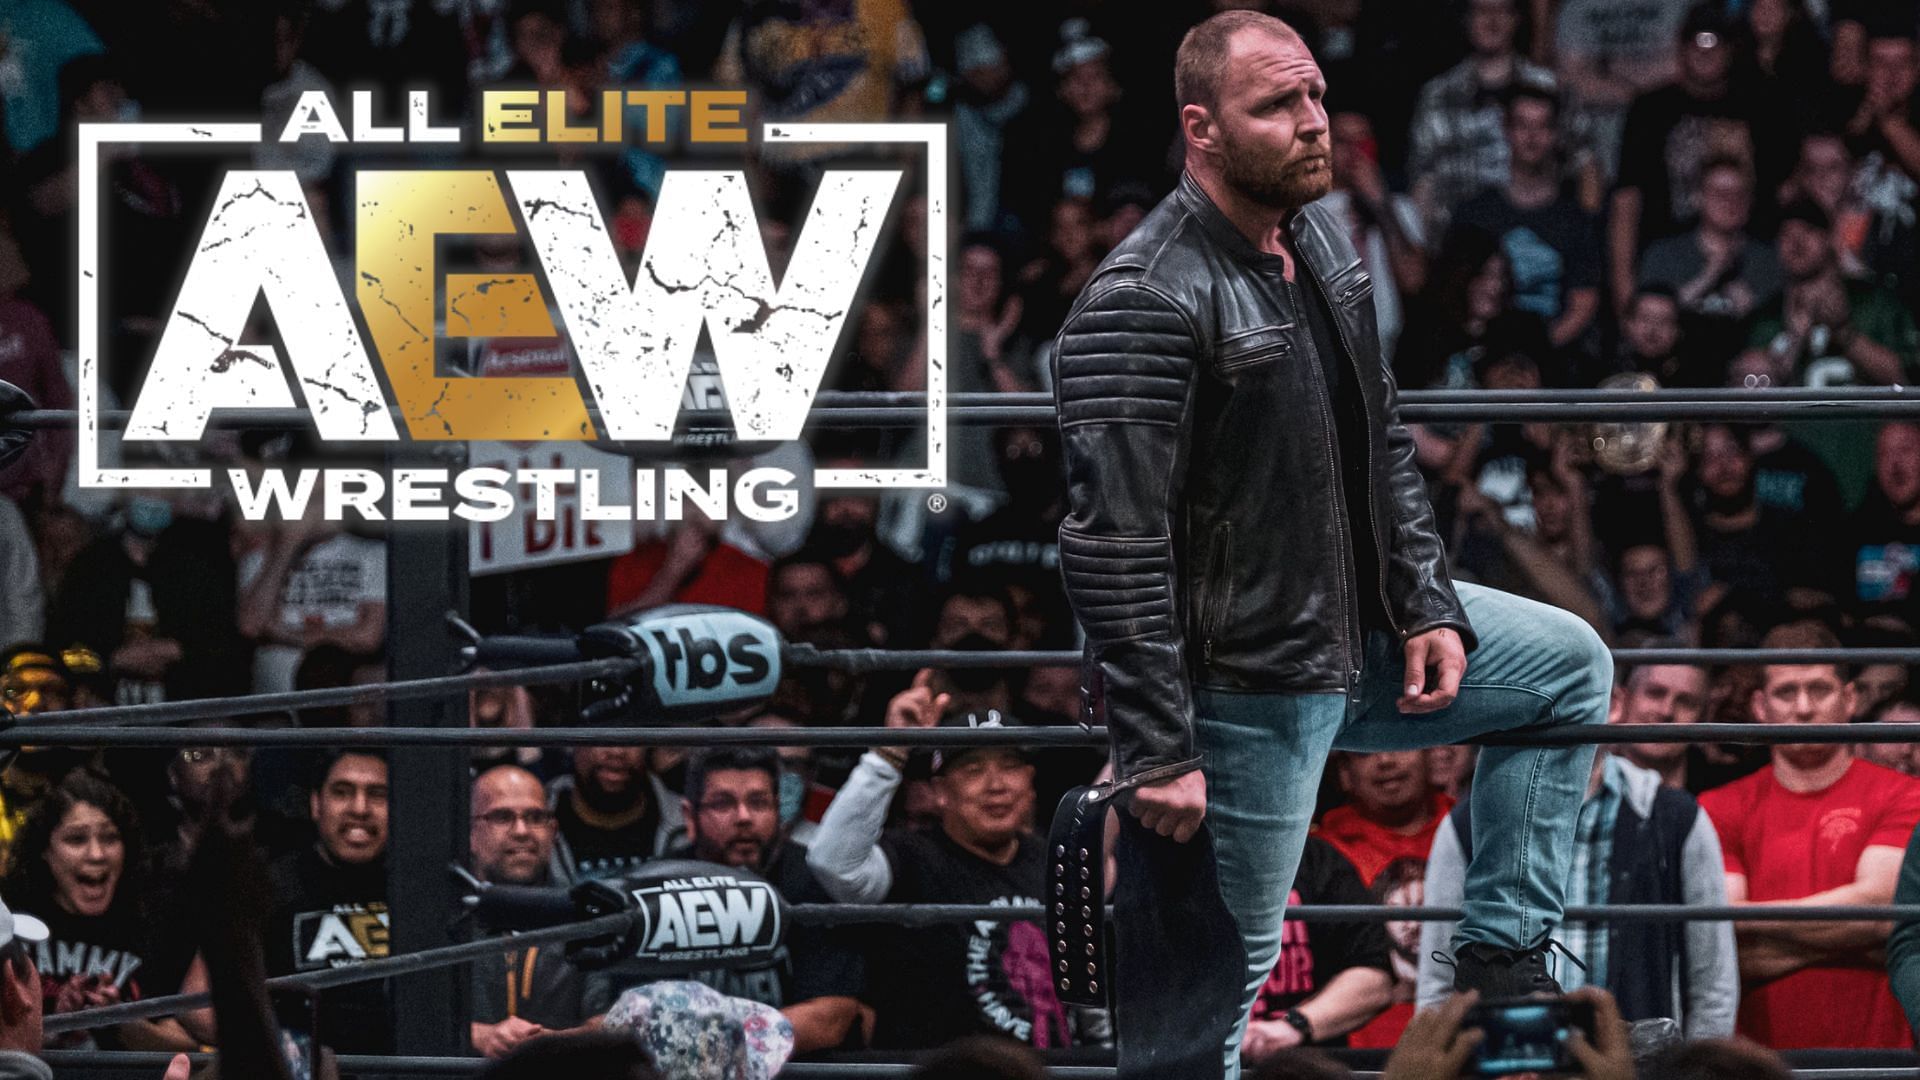 Jon Moxley has been an inspiration to many stars in AEW!